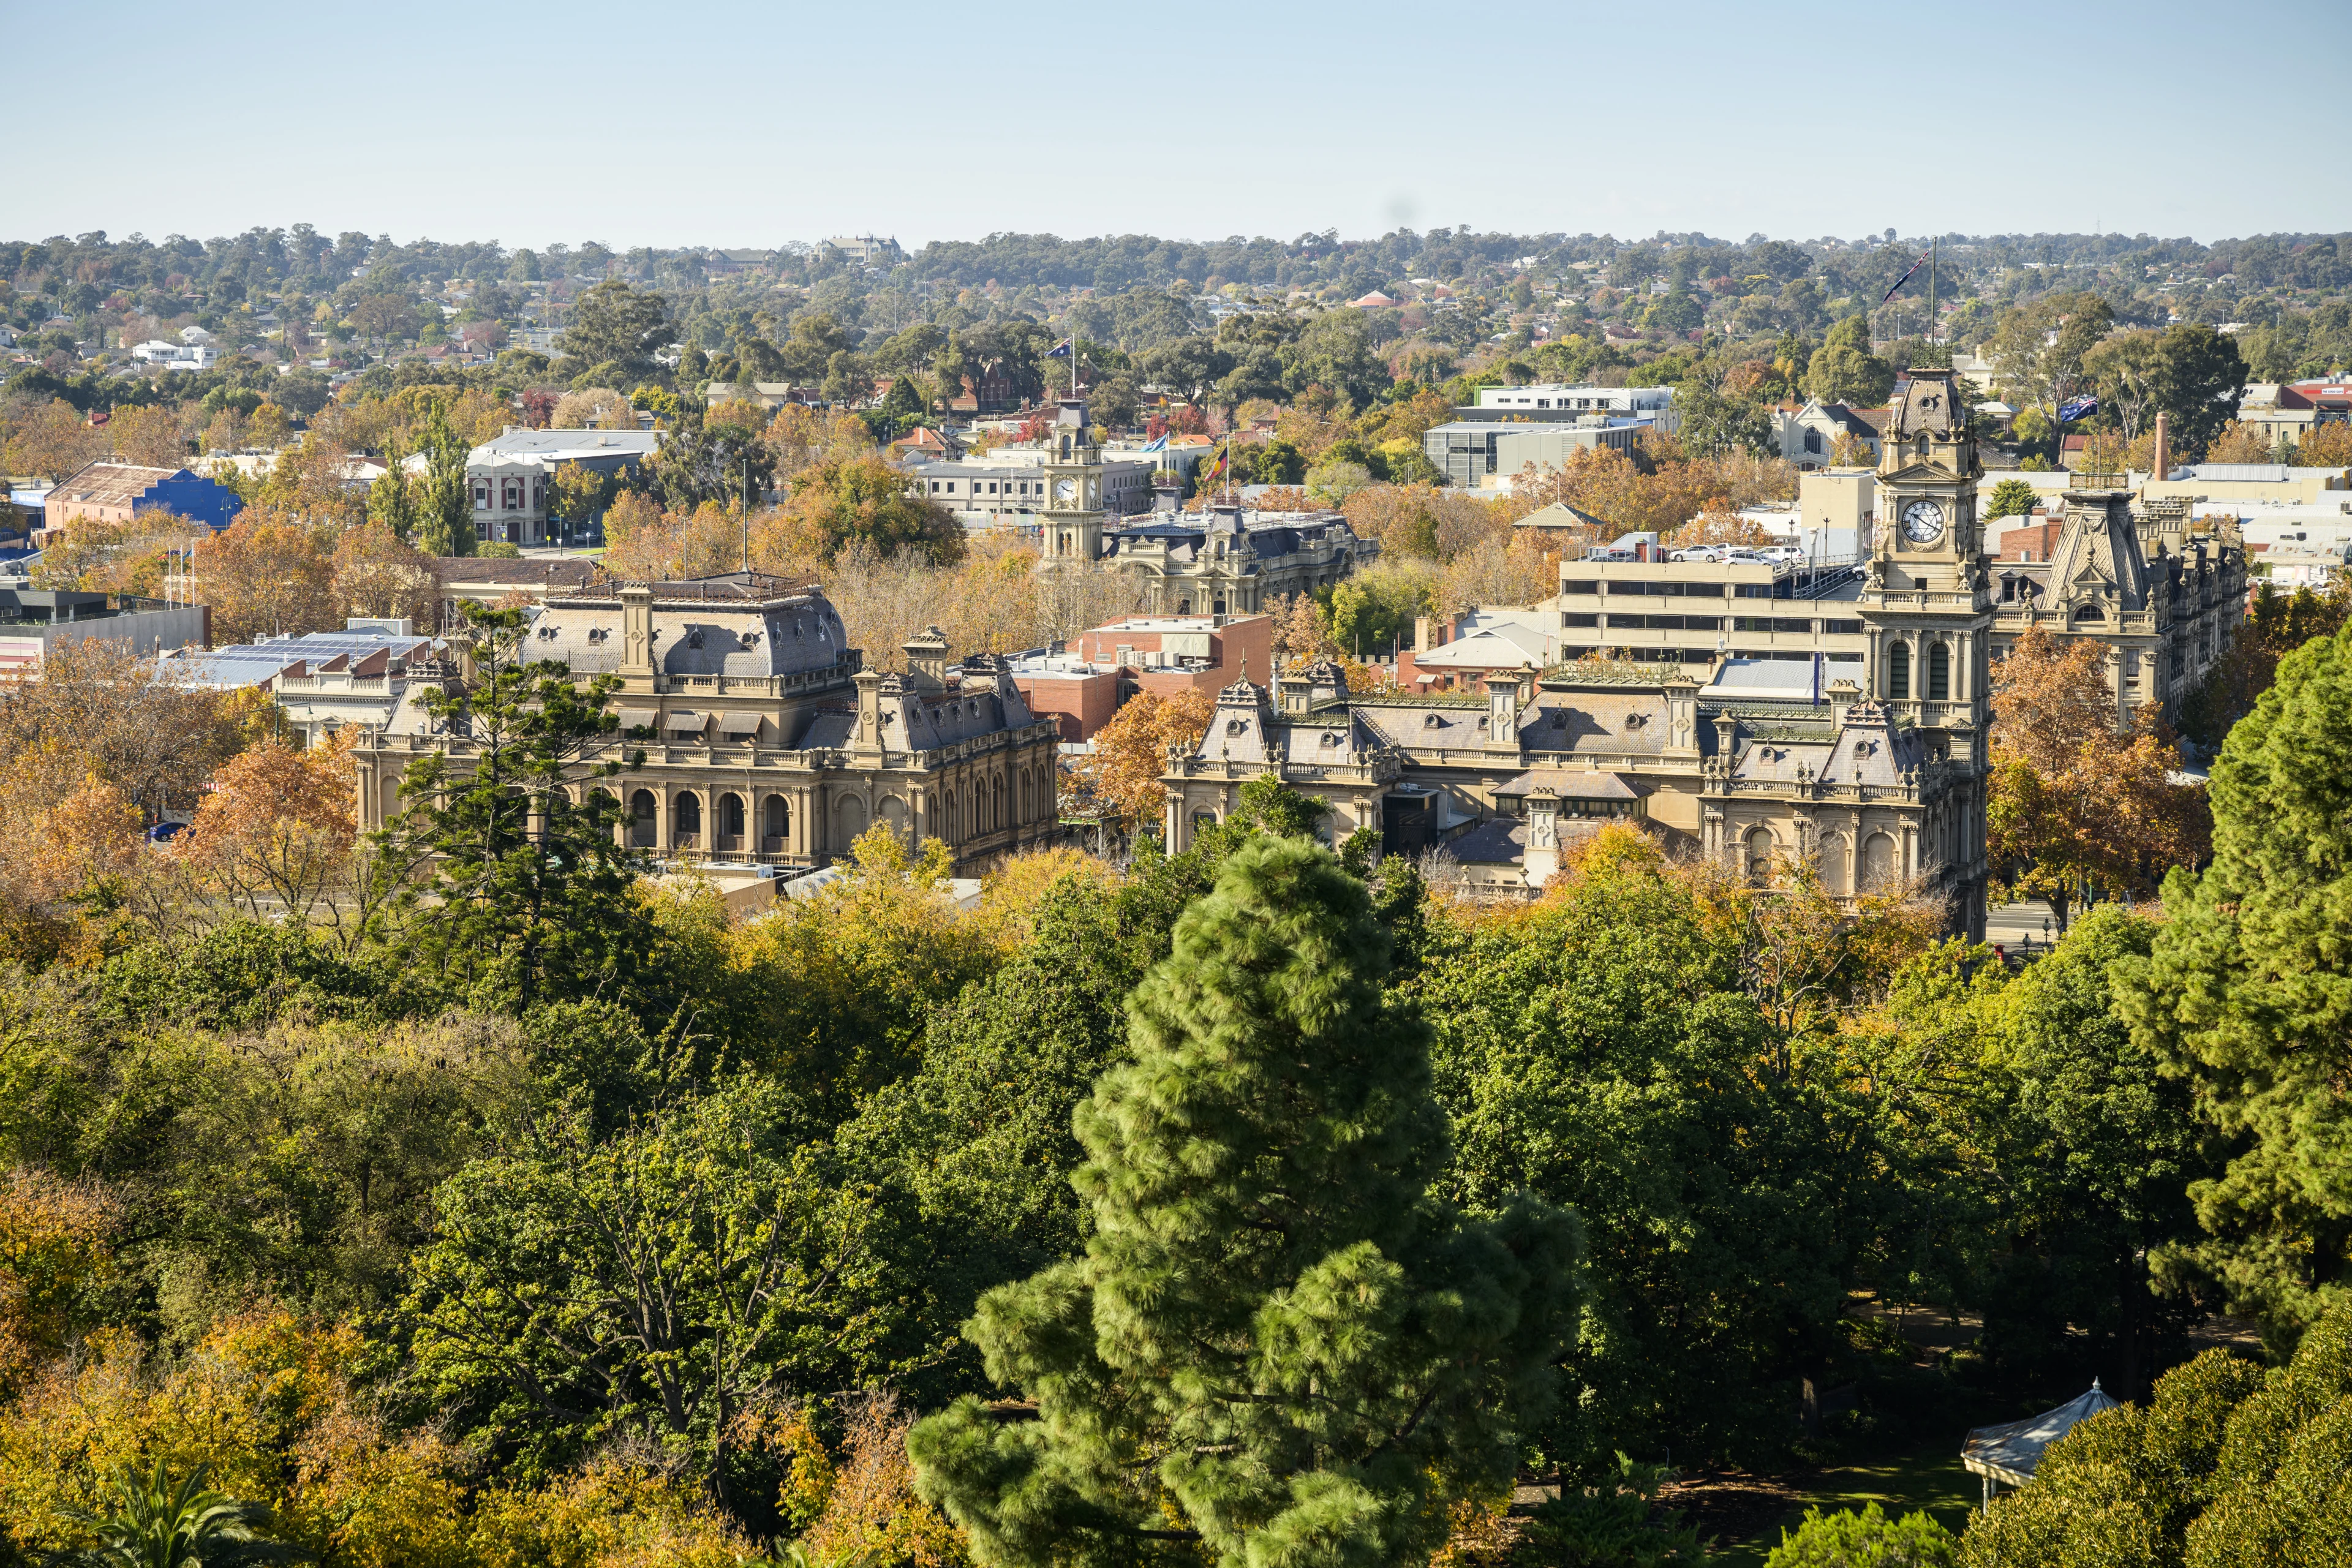 Panoramic view from the top of the poppet head lookout at Rosalind Park, Bendigo, Victoria.